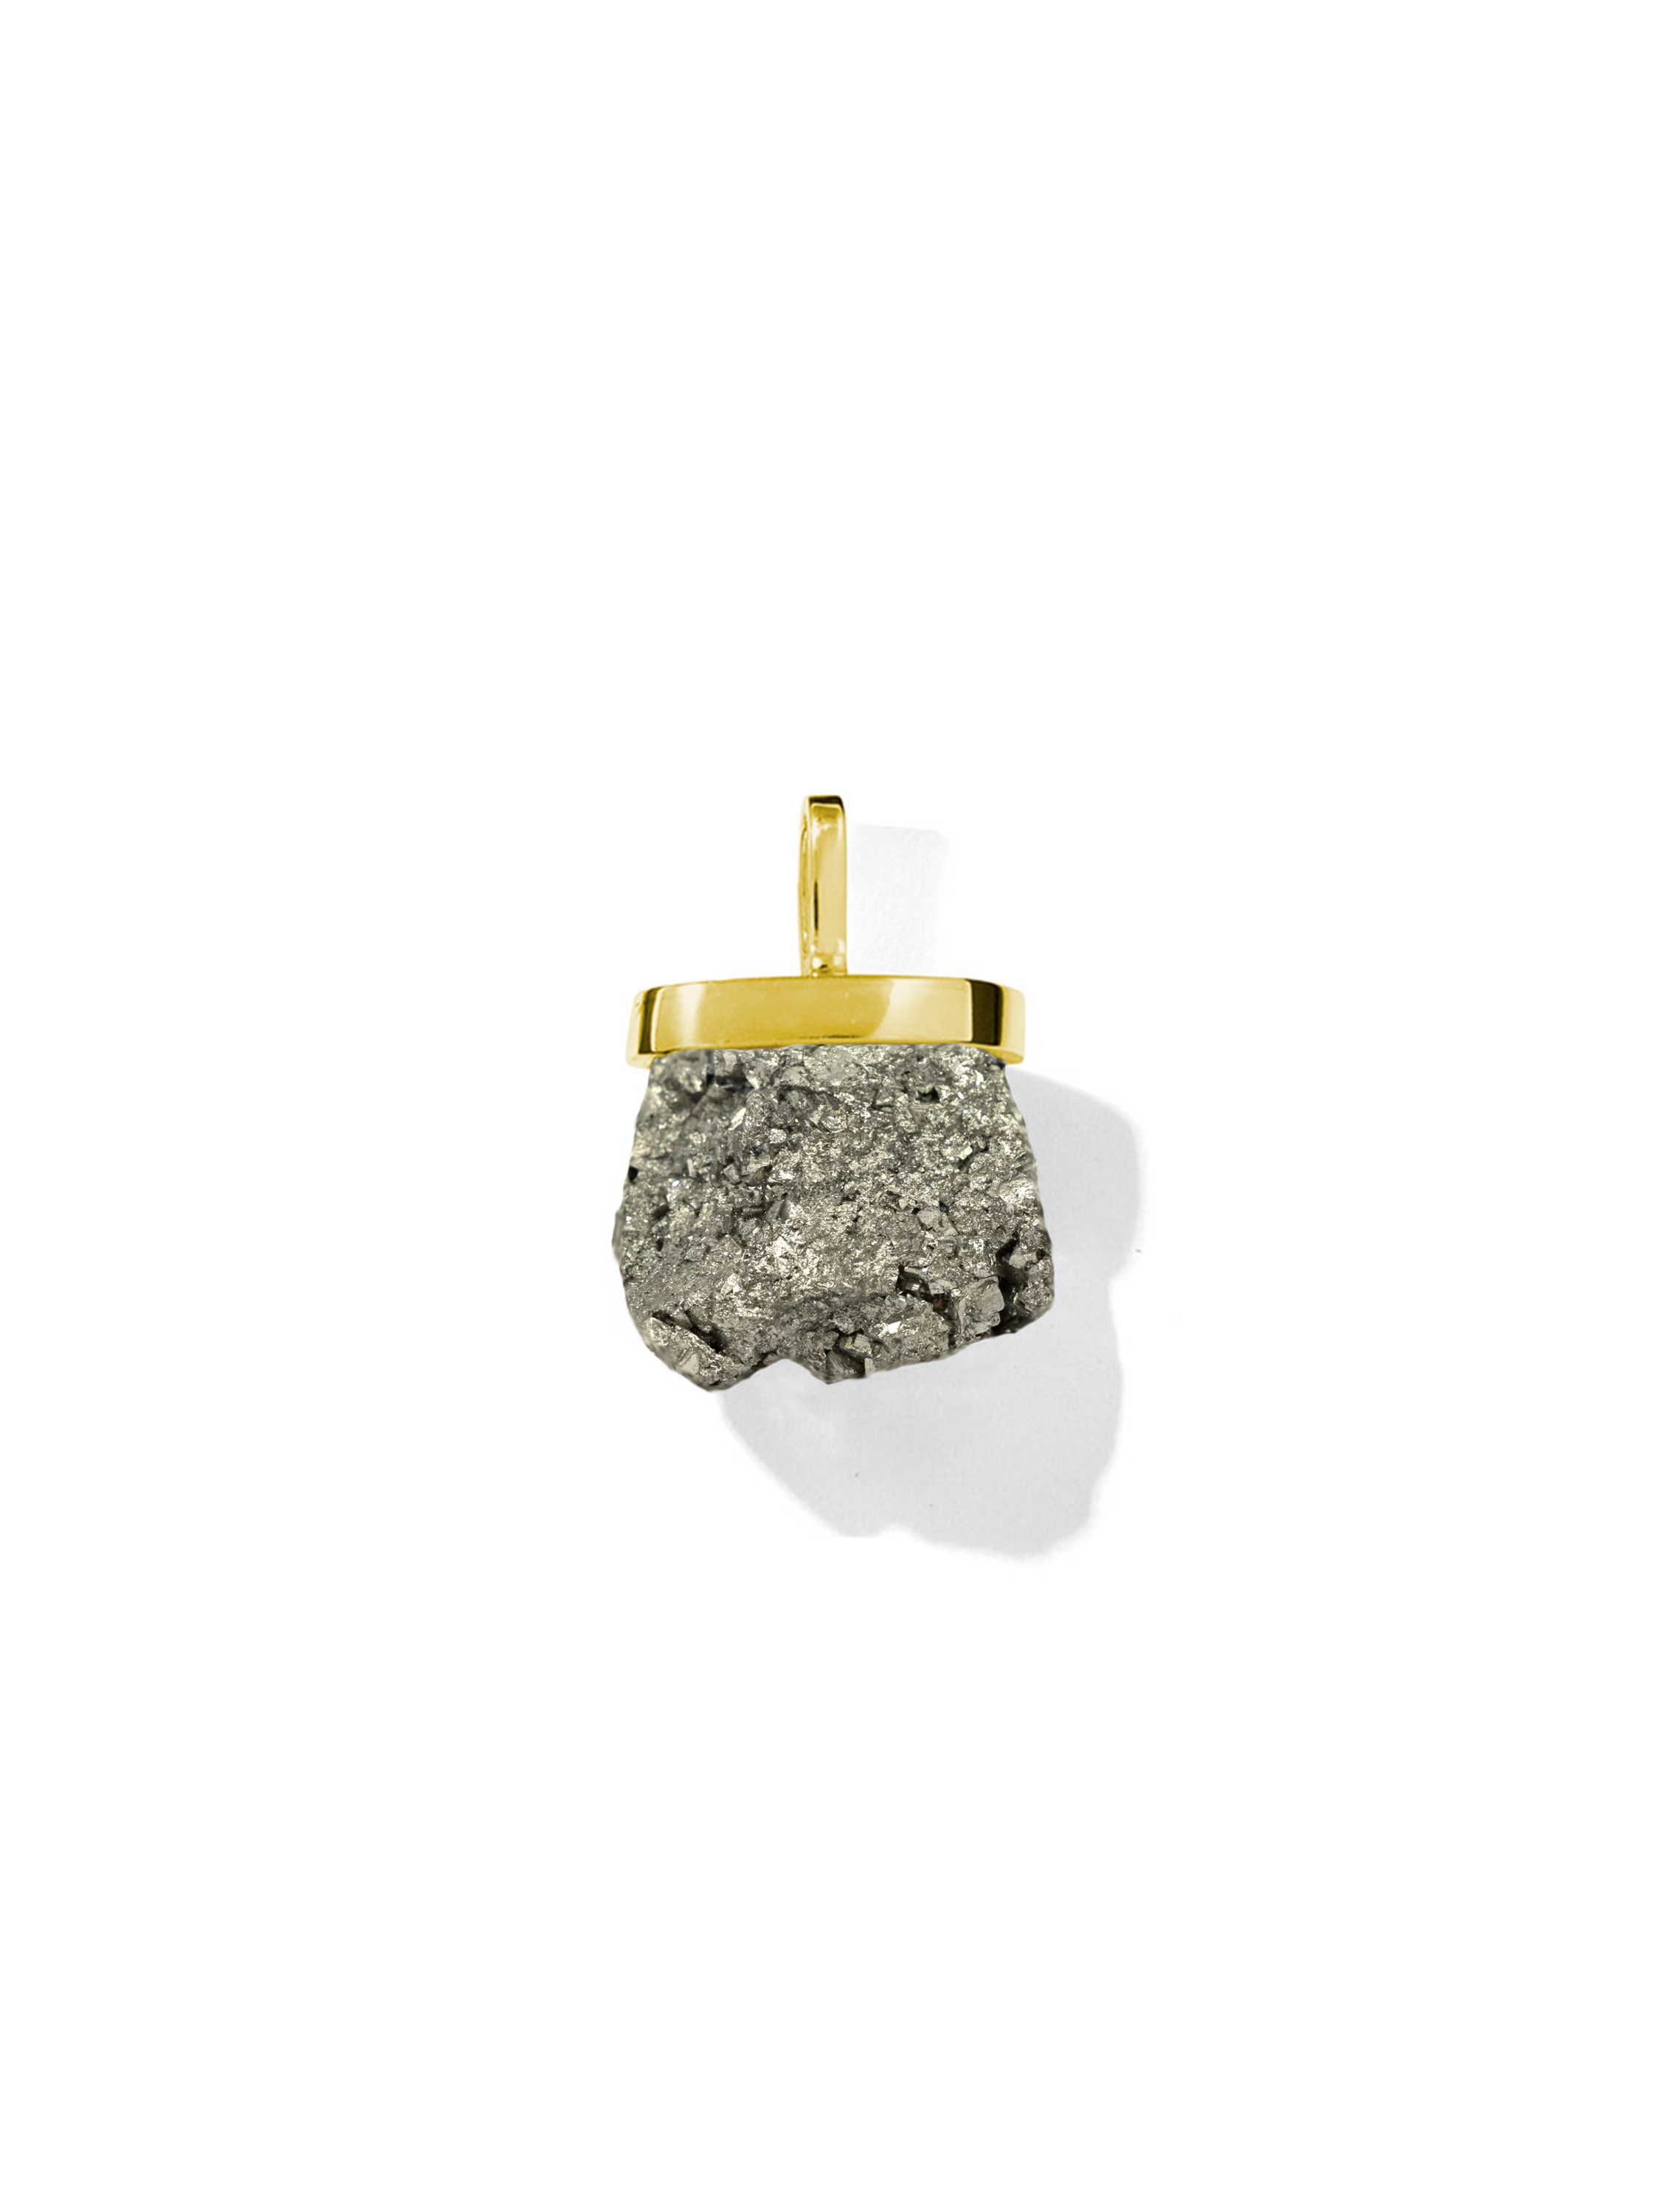 raw crystal necklace charm | pyrite